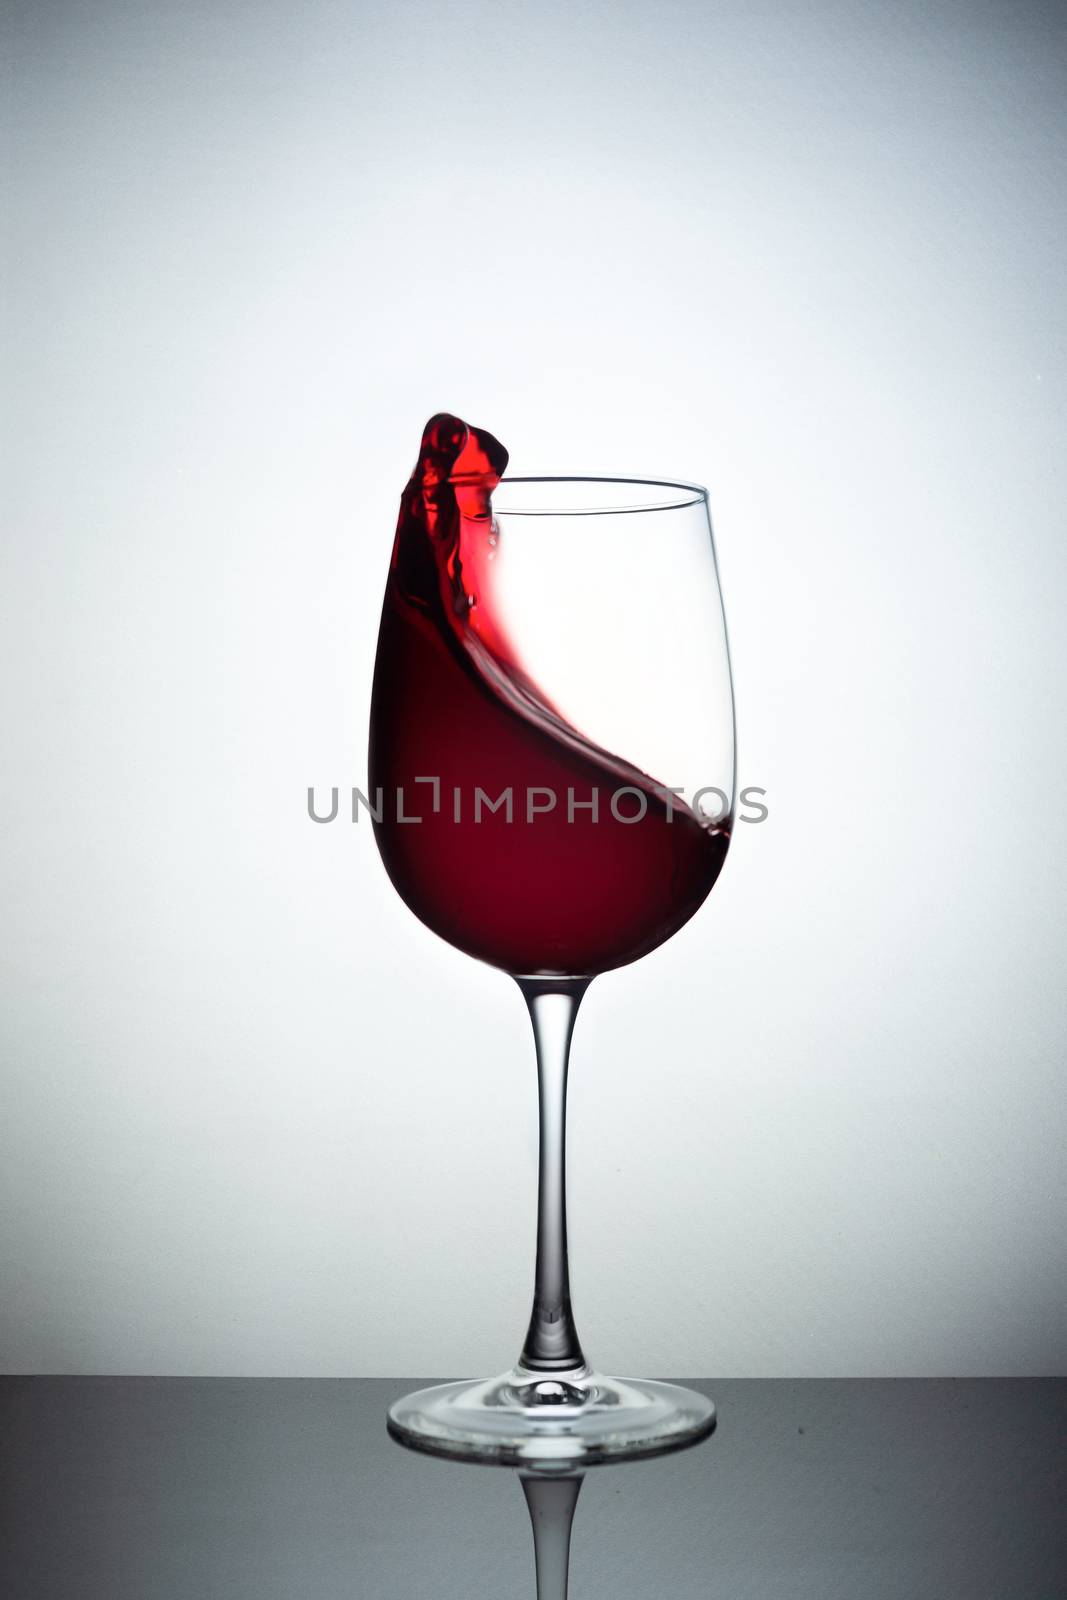 Creative photo of wine glass with storm in a glass on white background. A wine glass filled wine and a wave of wine flies from a wine glass. Wine glass stay on black glass sheet. Stock liquid motion photo.